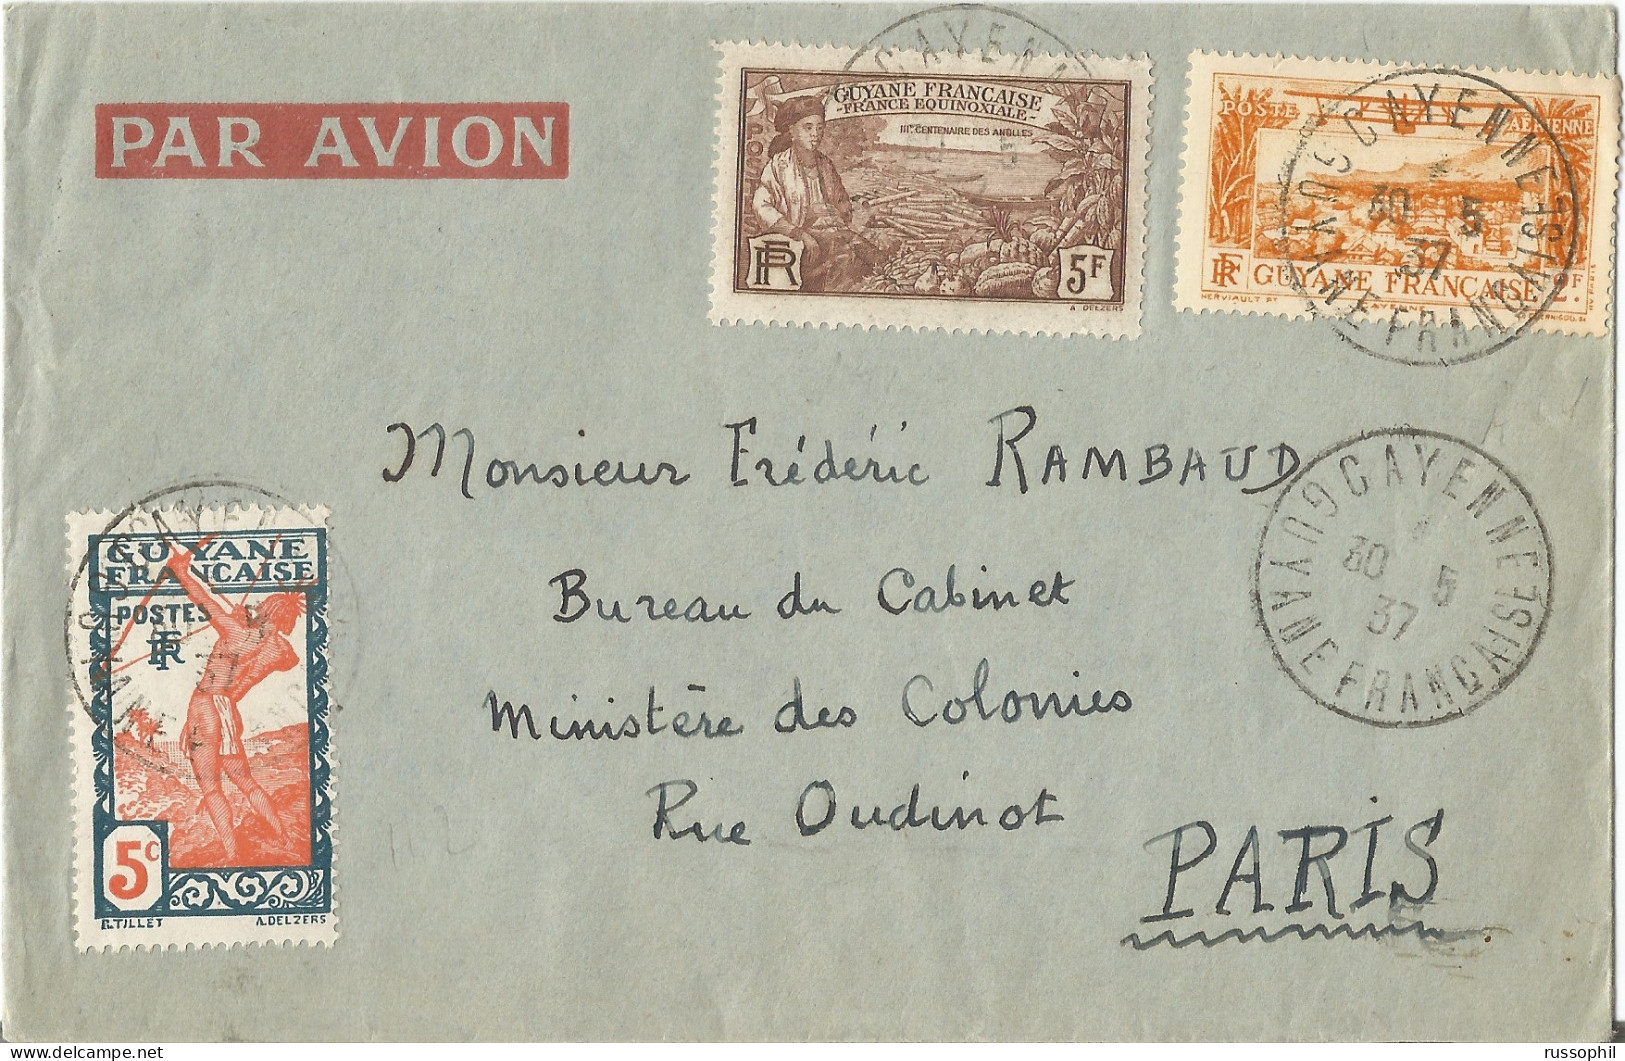 GUYANE - 7 FR.  5 CENT. FRANKING ON AIR MAILED COVER FROM CAYENNE TO FRANCE - 1937 - Covers & Documents